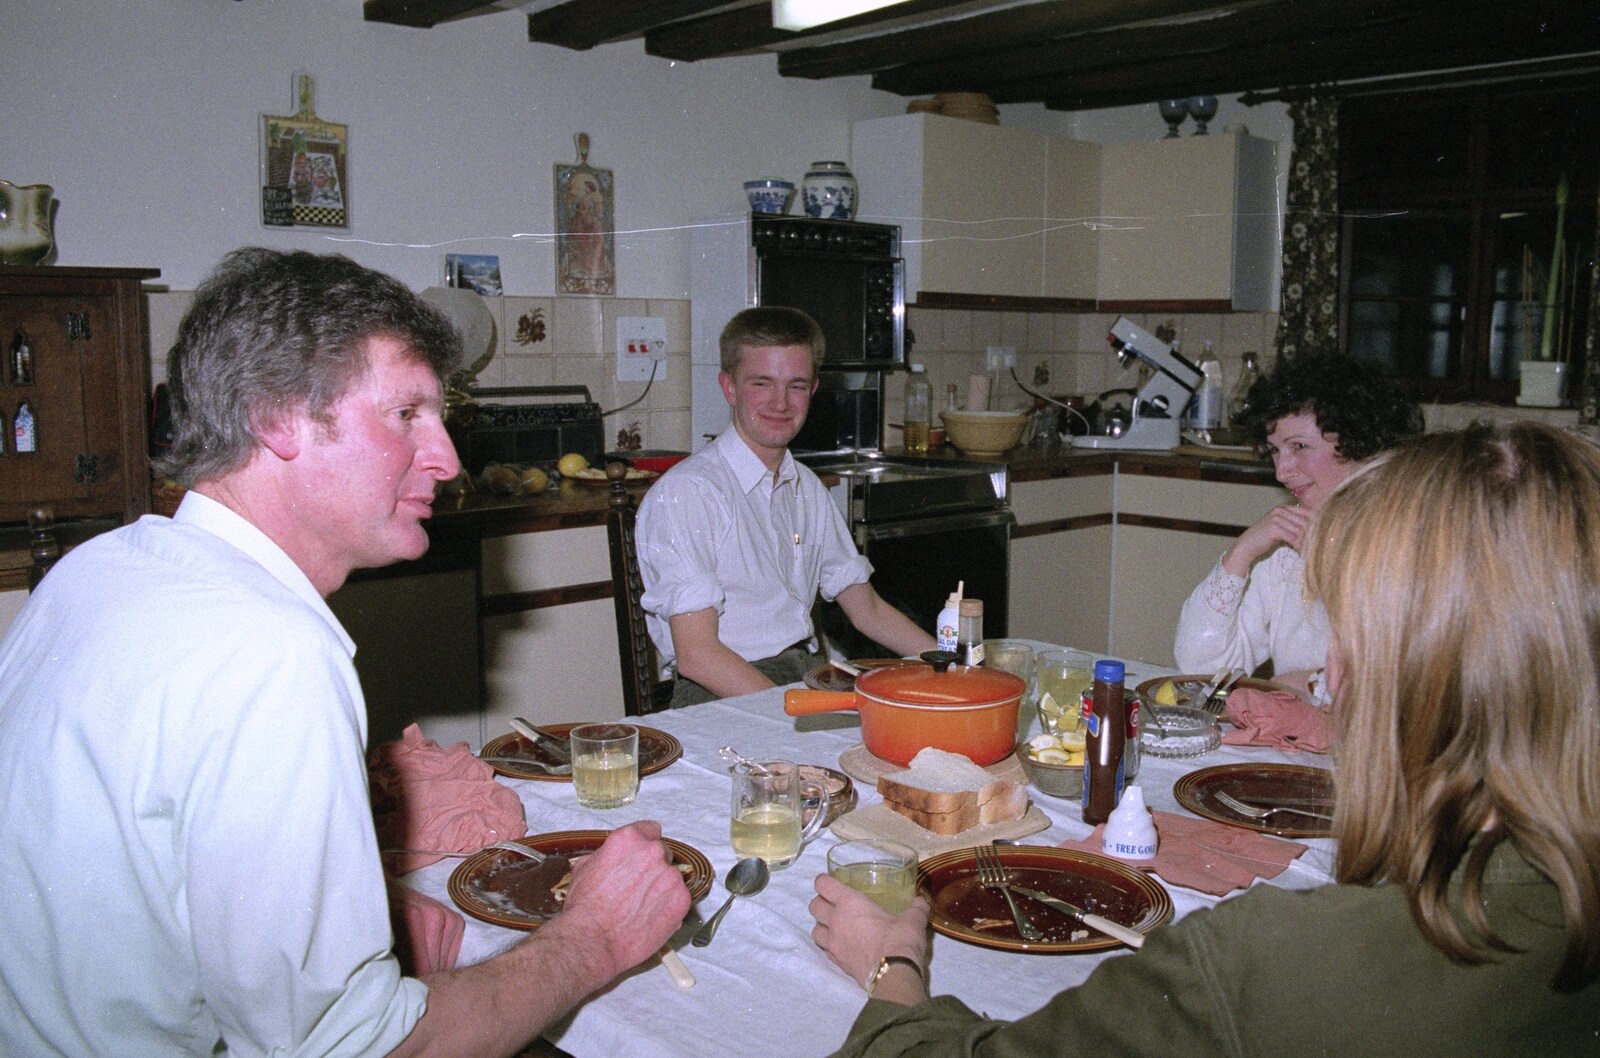 Geoff, Nosher and Janet around the kitchen table from Pancake Day, Stuston, Suffolk - 18th February 1991